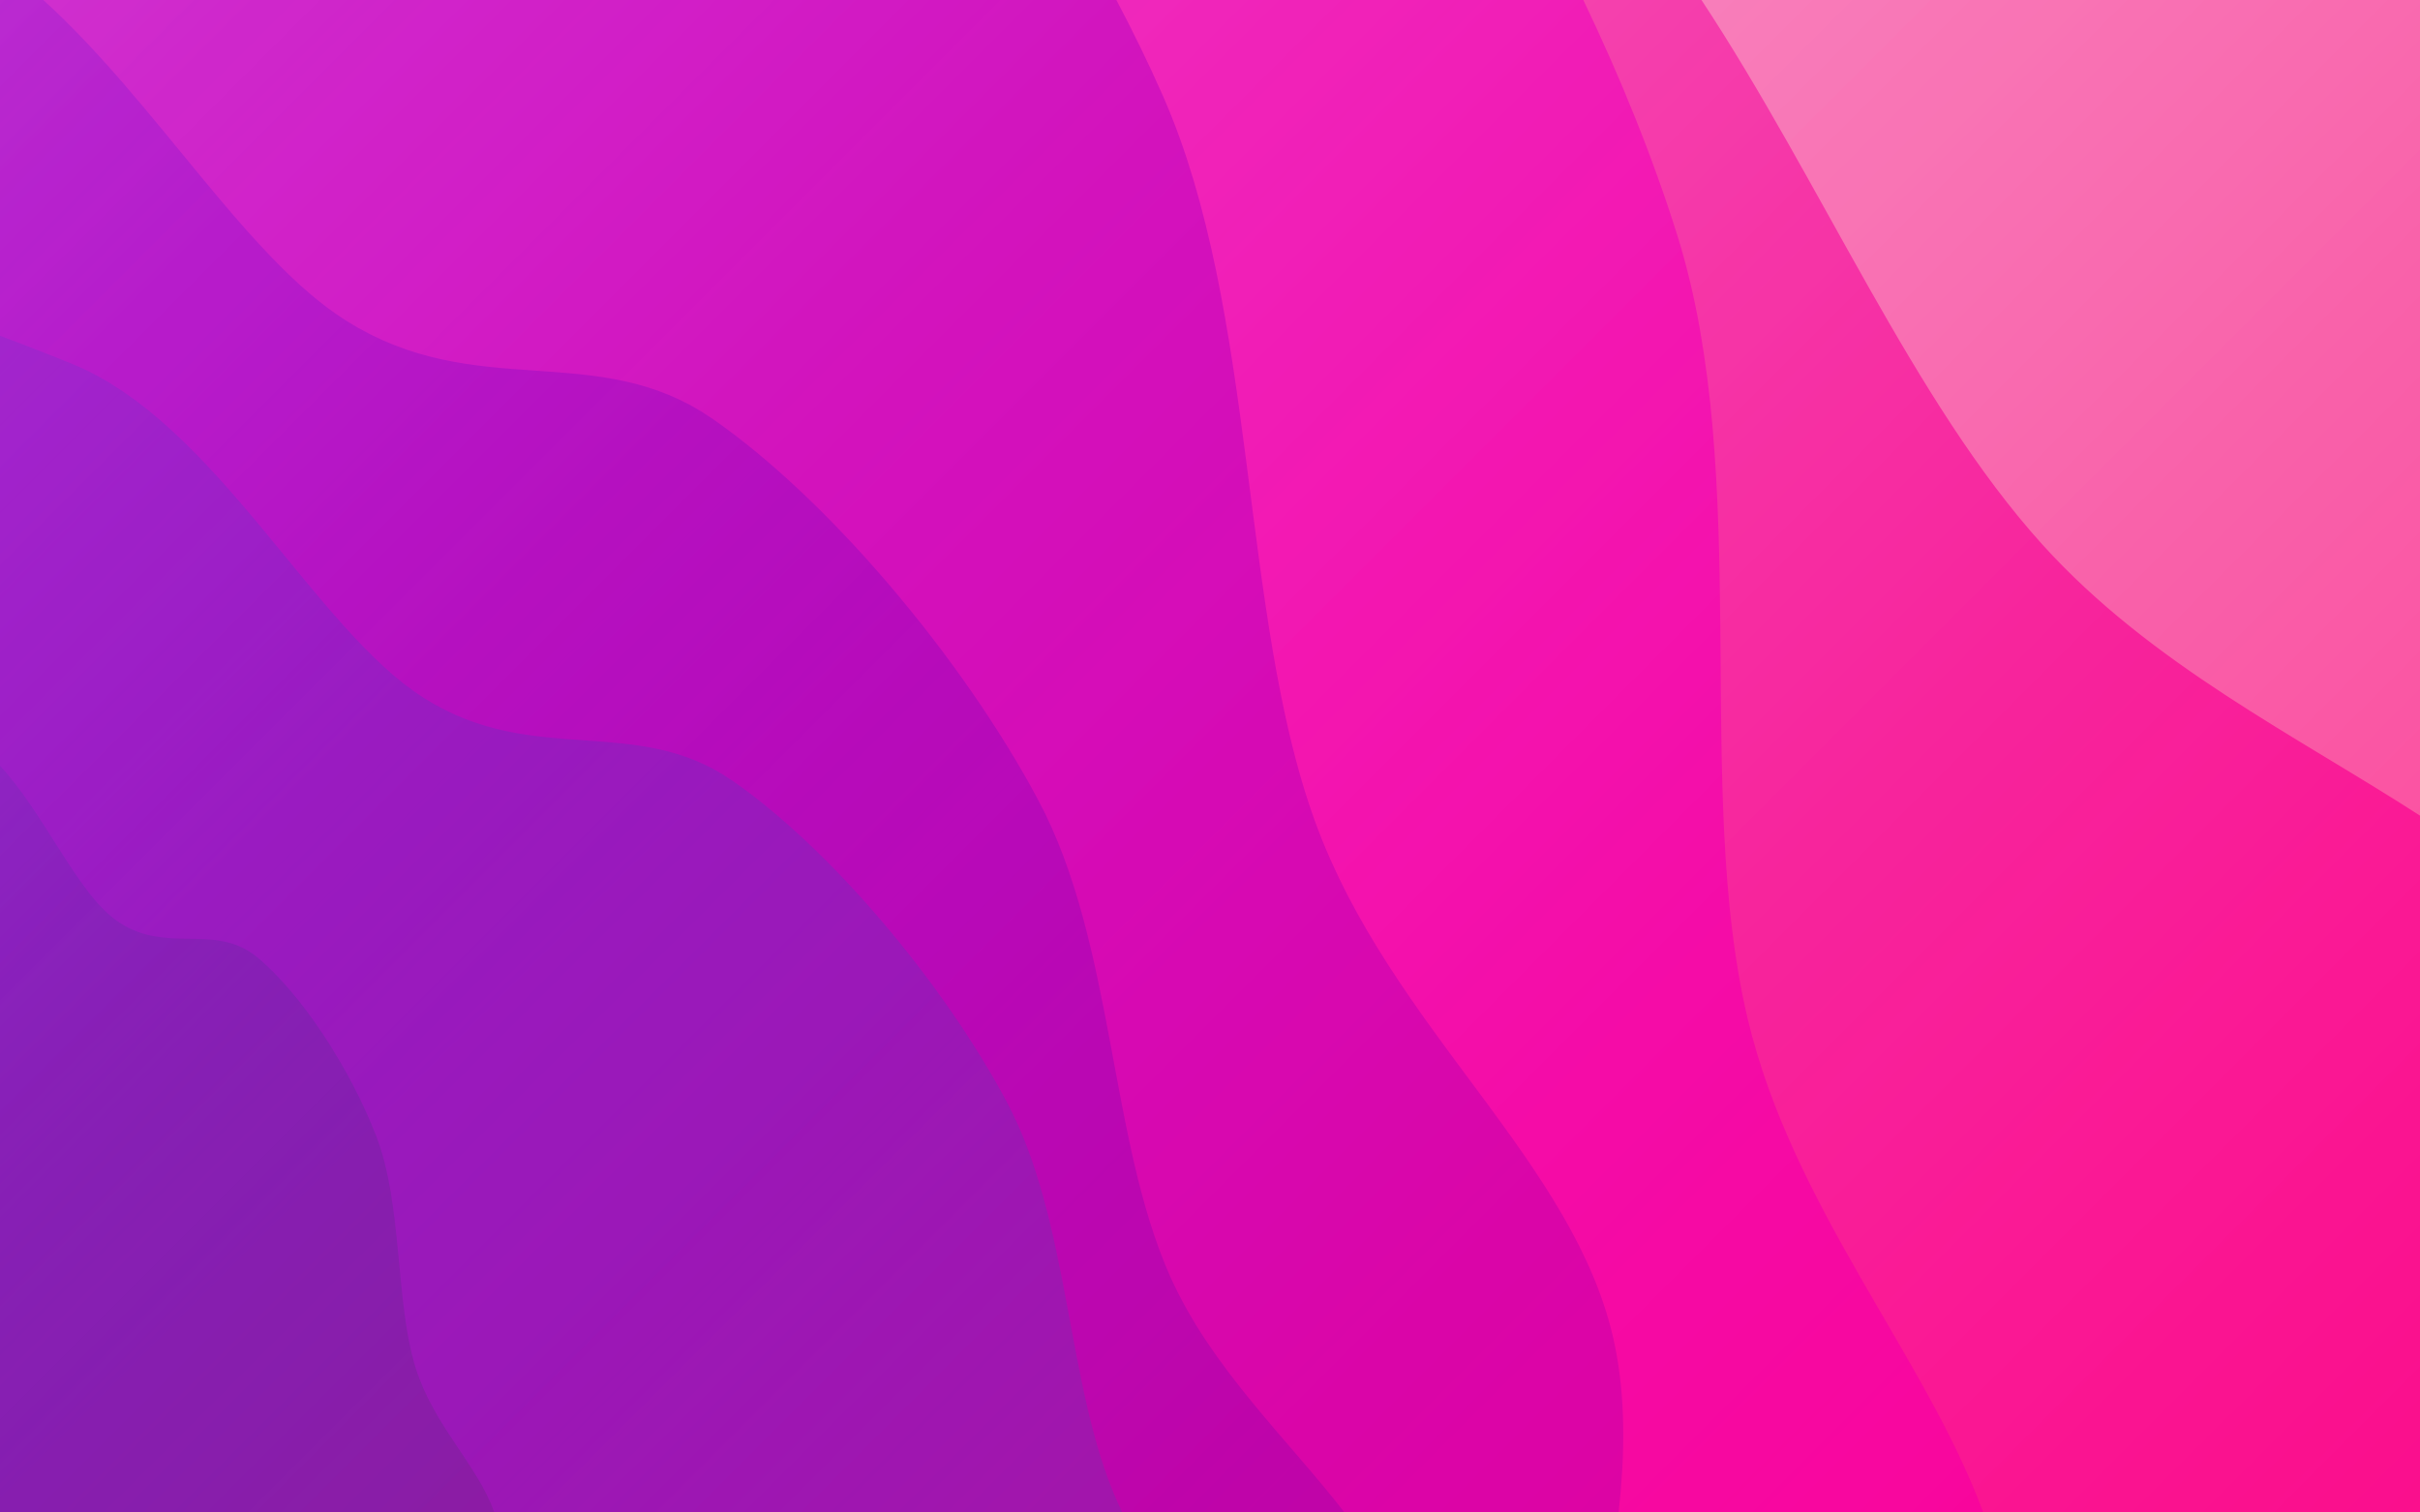 General 2500x1562 pink colorful simple background minimalism abstract curved